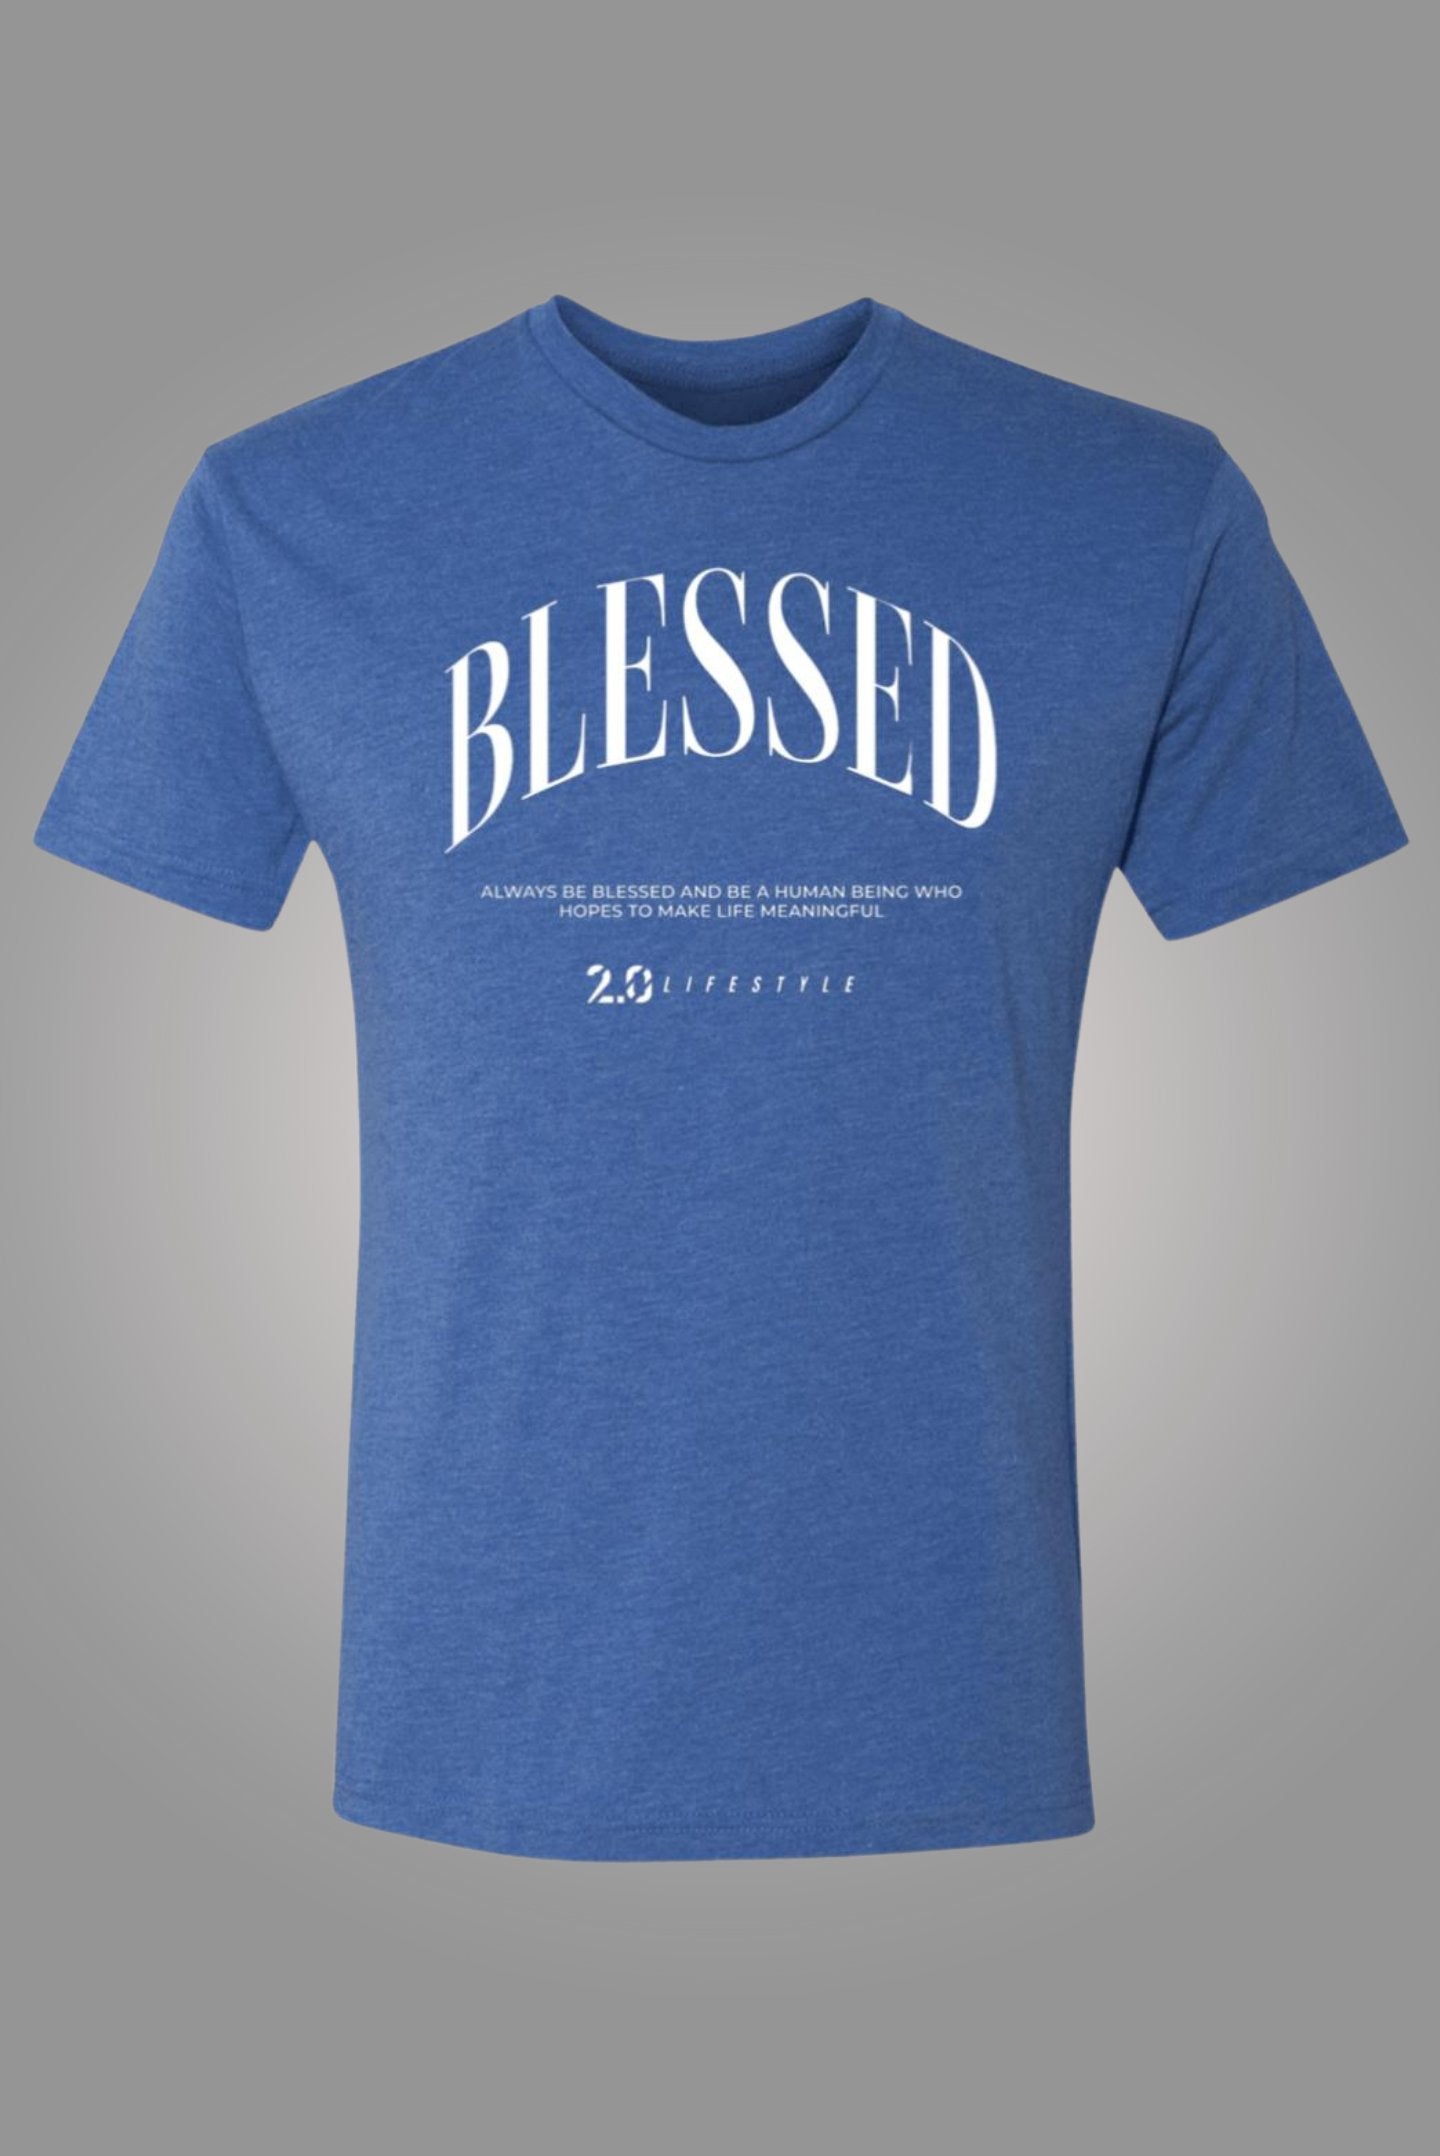 BLESSED Men's Triblend Tee - 2.0 Lifestyle